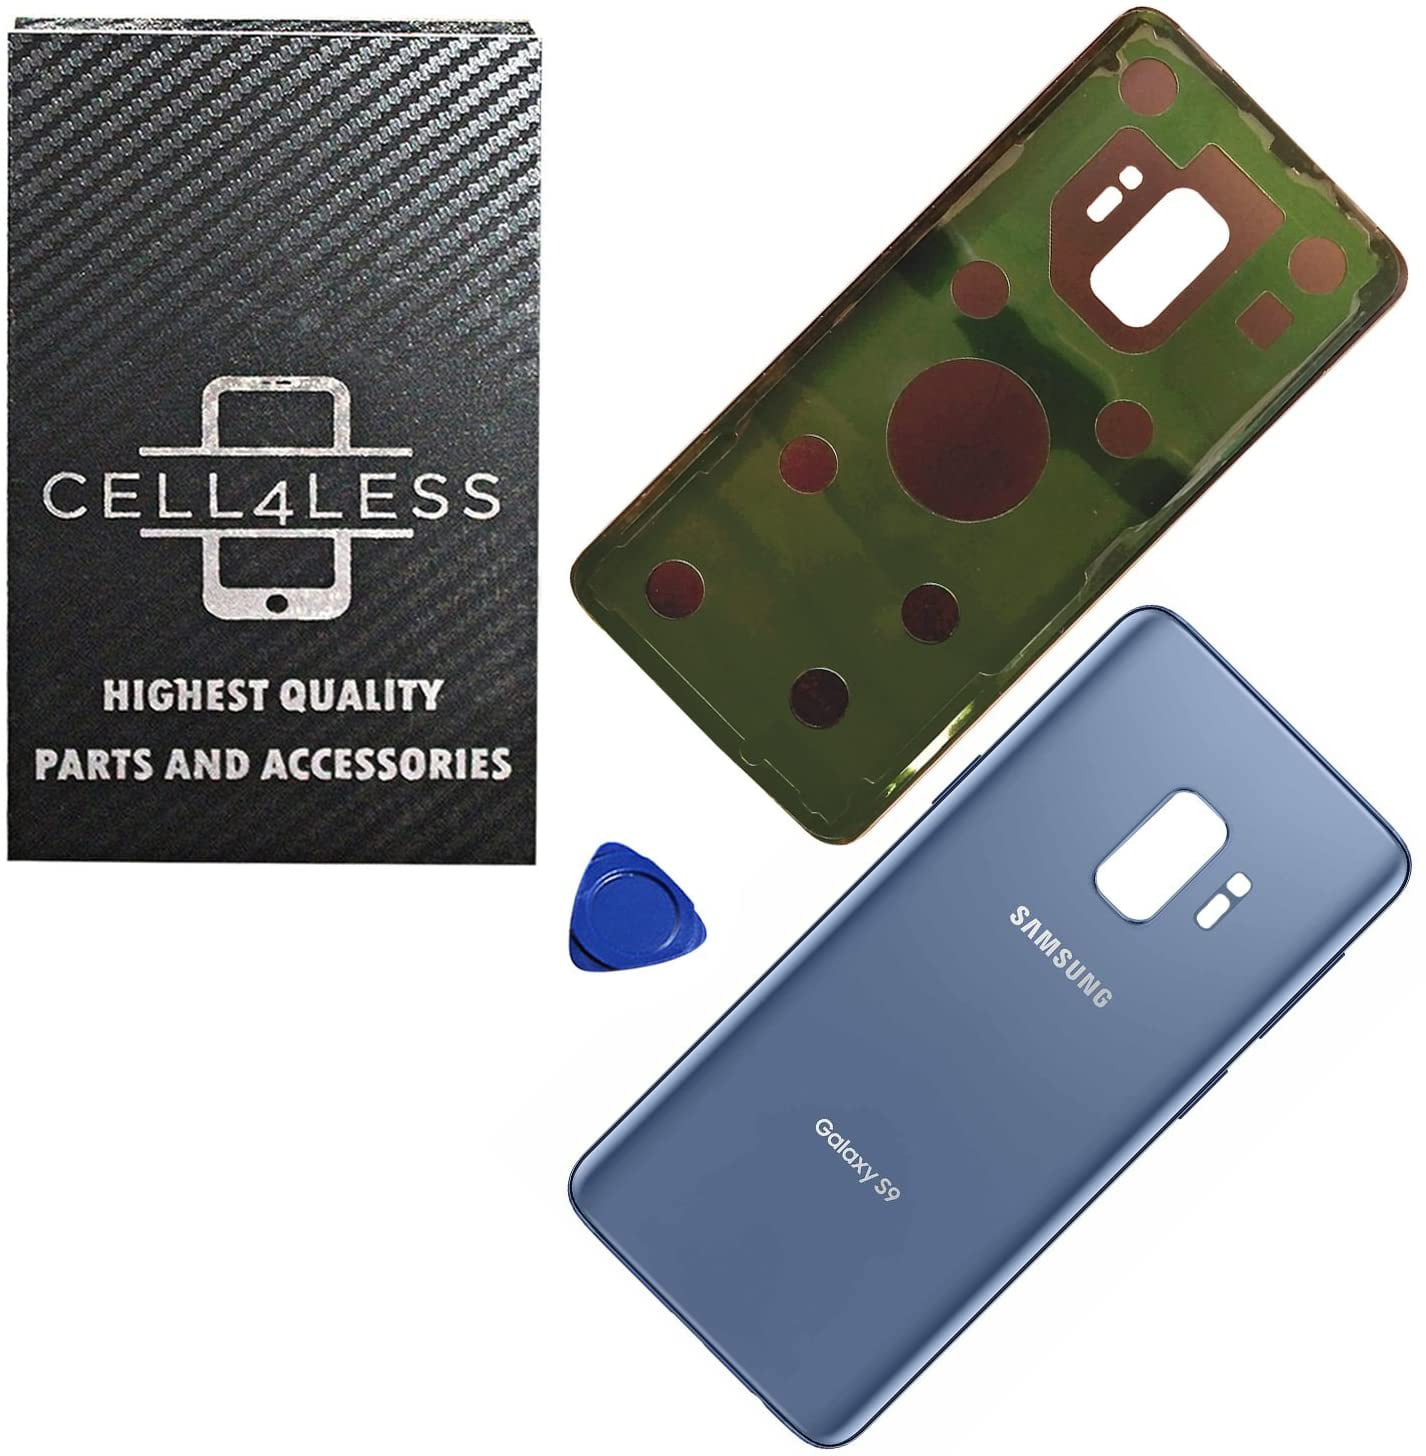 Gold Cell4less Back Glass Replacement Kit for The iPhone 11 Pro ~ Rear Back Glass w/Removal Tool 